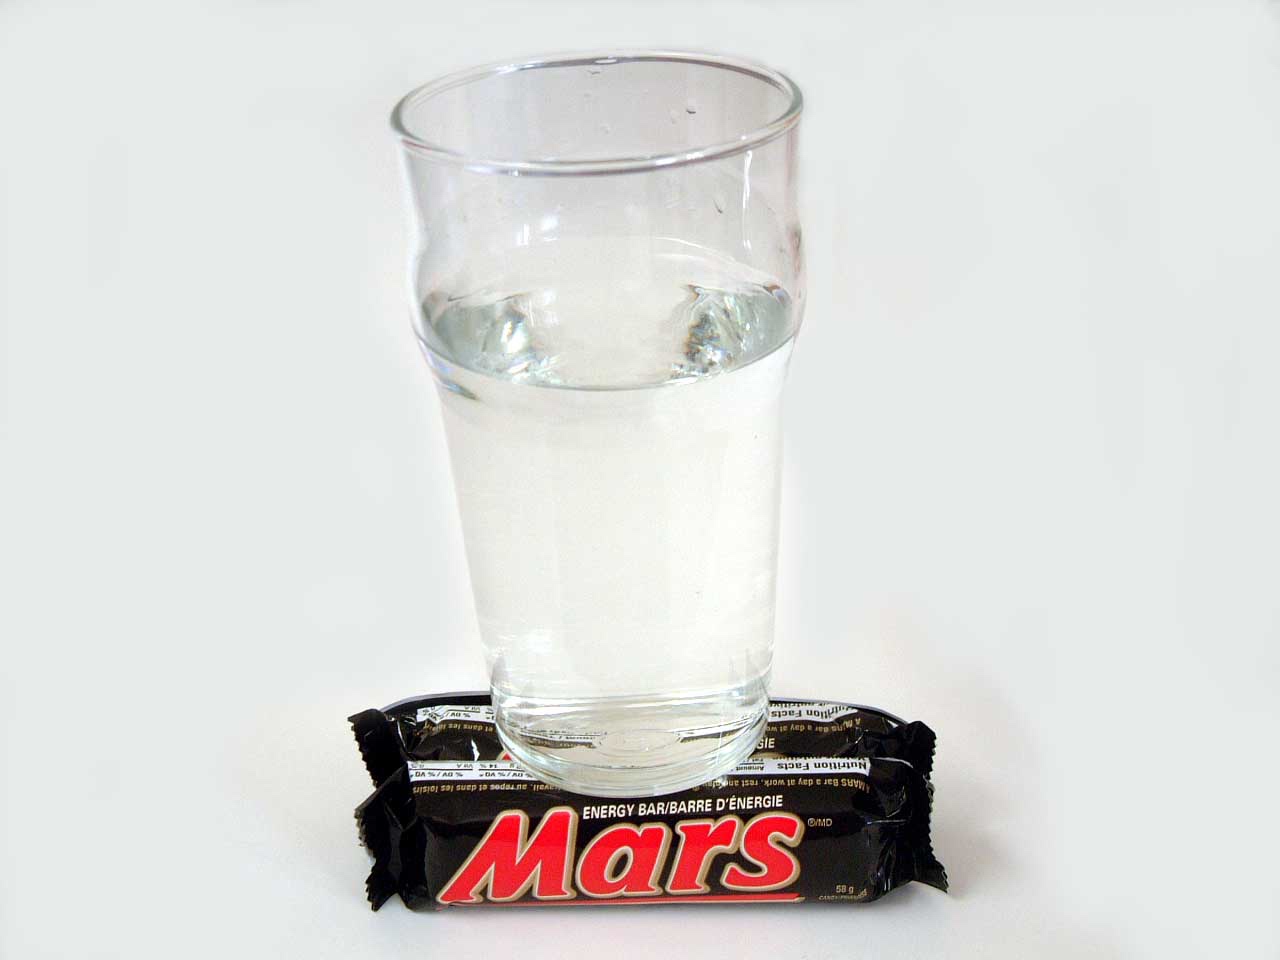 dank meme there is water on mars - Sidow Omd 21993N3.0 3499 98 1993N3 Mars Bar a day at work, rest and Nutrition Facts Amet cavall, au repos et dans les loisirs Vouvinvo va Gie 19 Bar a day al rition Facts